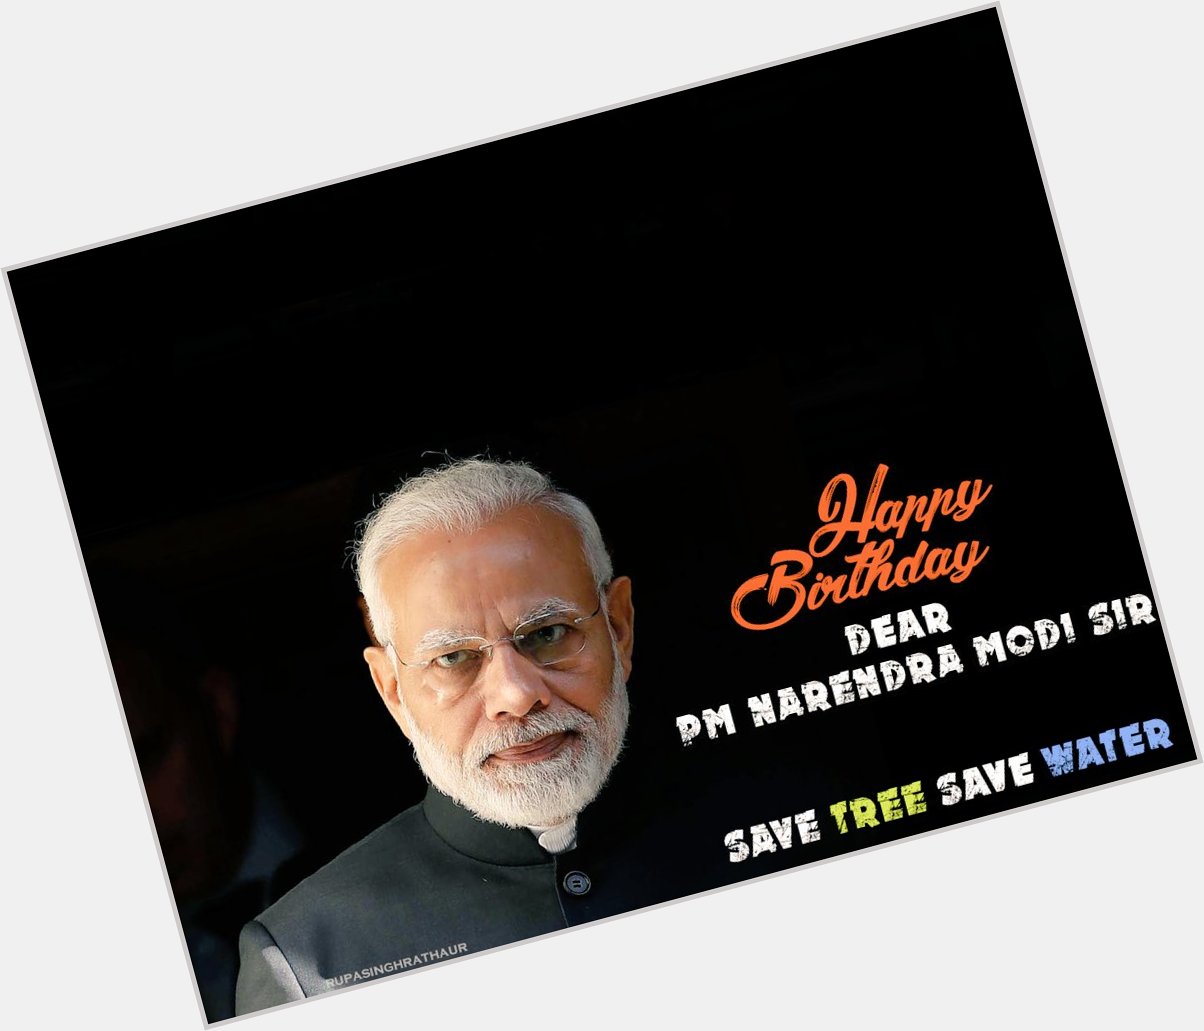 Happy Birthday Dear PM Narendra Modi Sir

I wish please give a msg again to every person save tree and save water. 